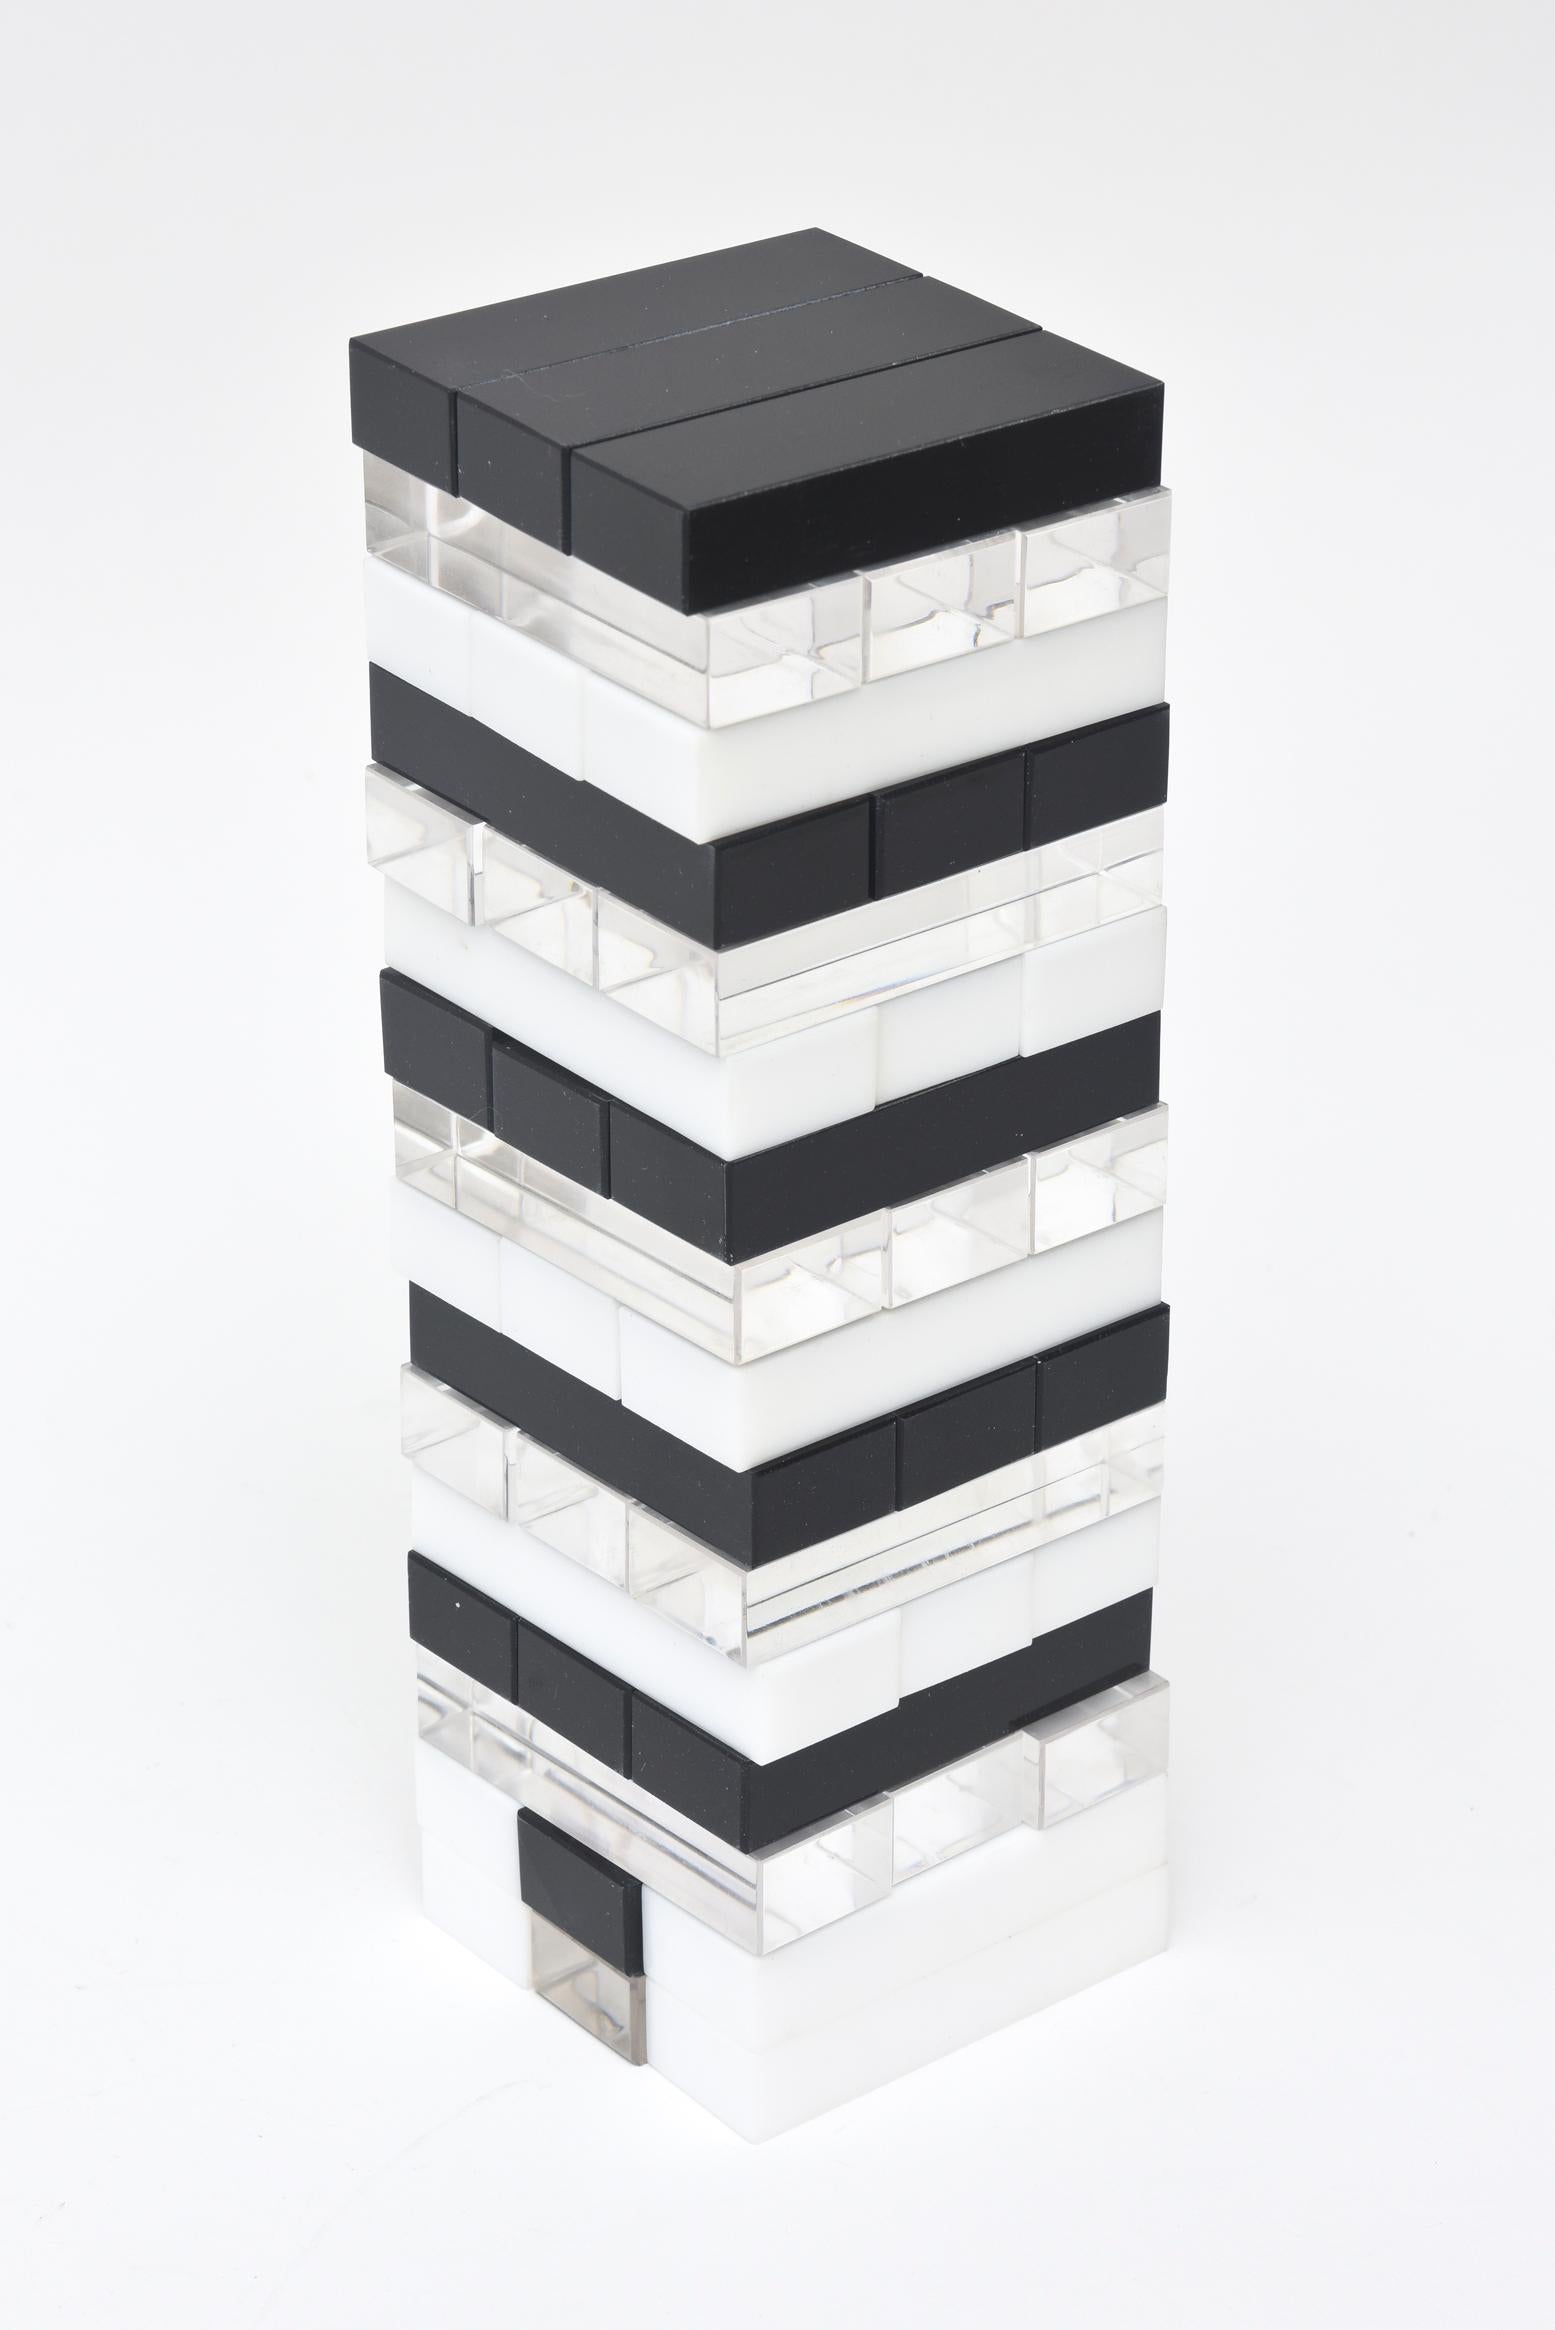 This vintage 1970s black and white Lucite tower sculpture is interactive as one can build forms from the disks. You can place some on the inside and others on the outside as if you are making a statement. There is a clear transparent Lucite sleeve